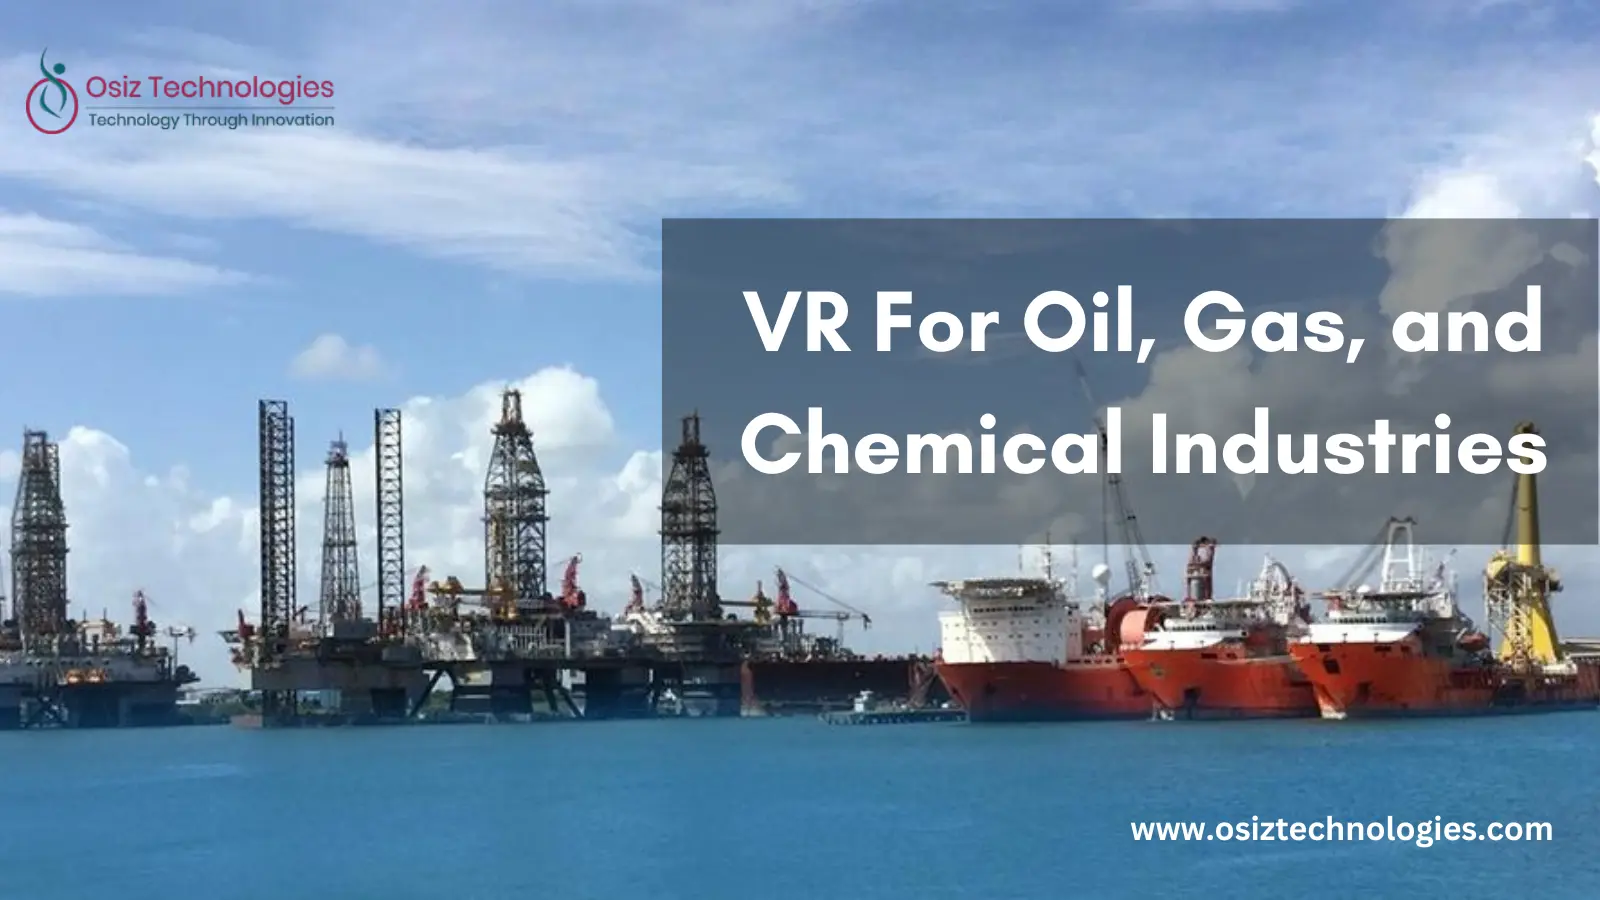 VR For Oil, Gas, and Chemical Industries